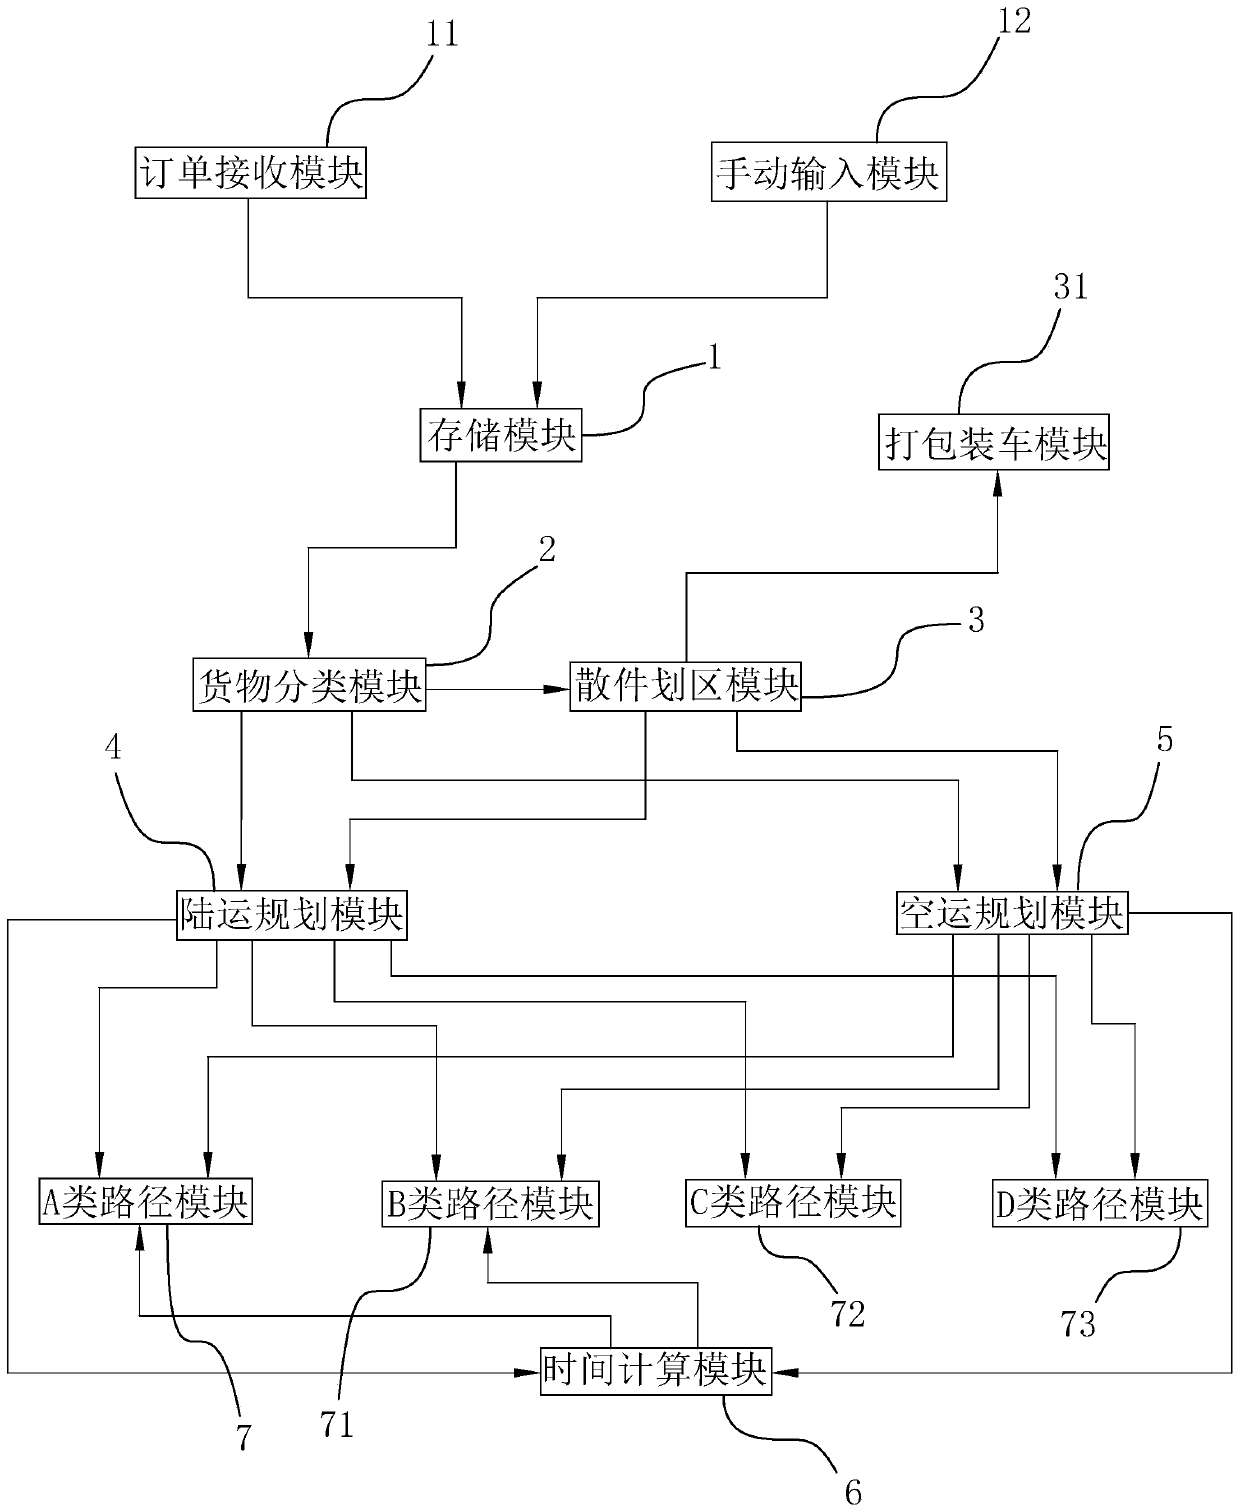 Logistics distribution path planning method and system based on geographic position